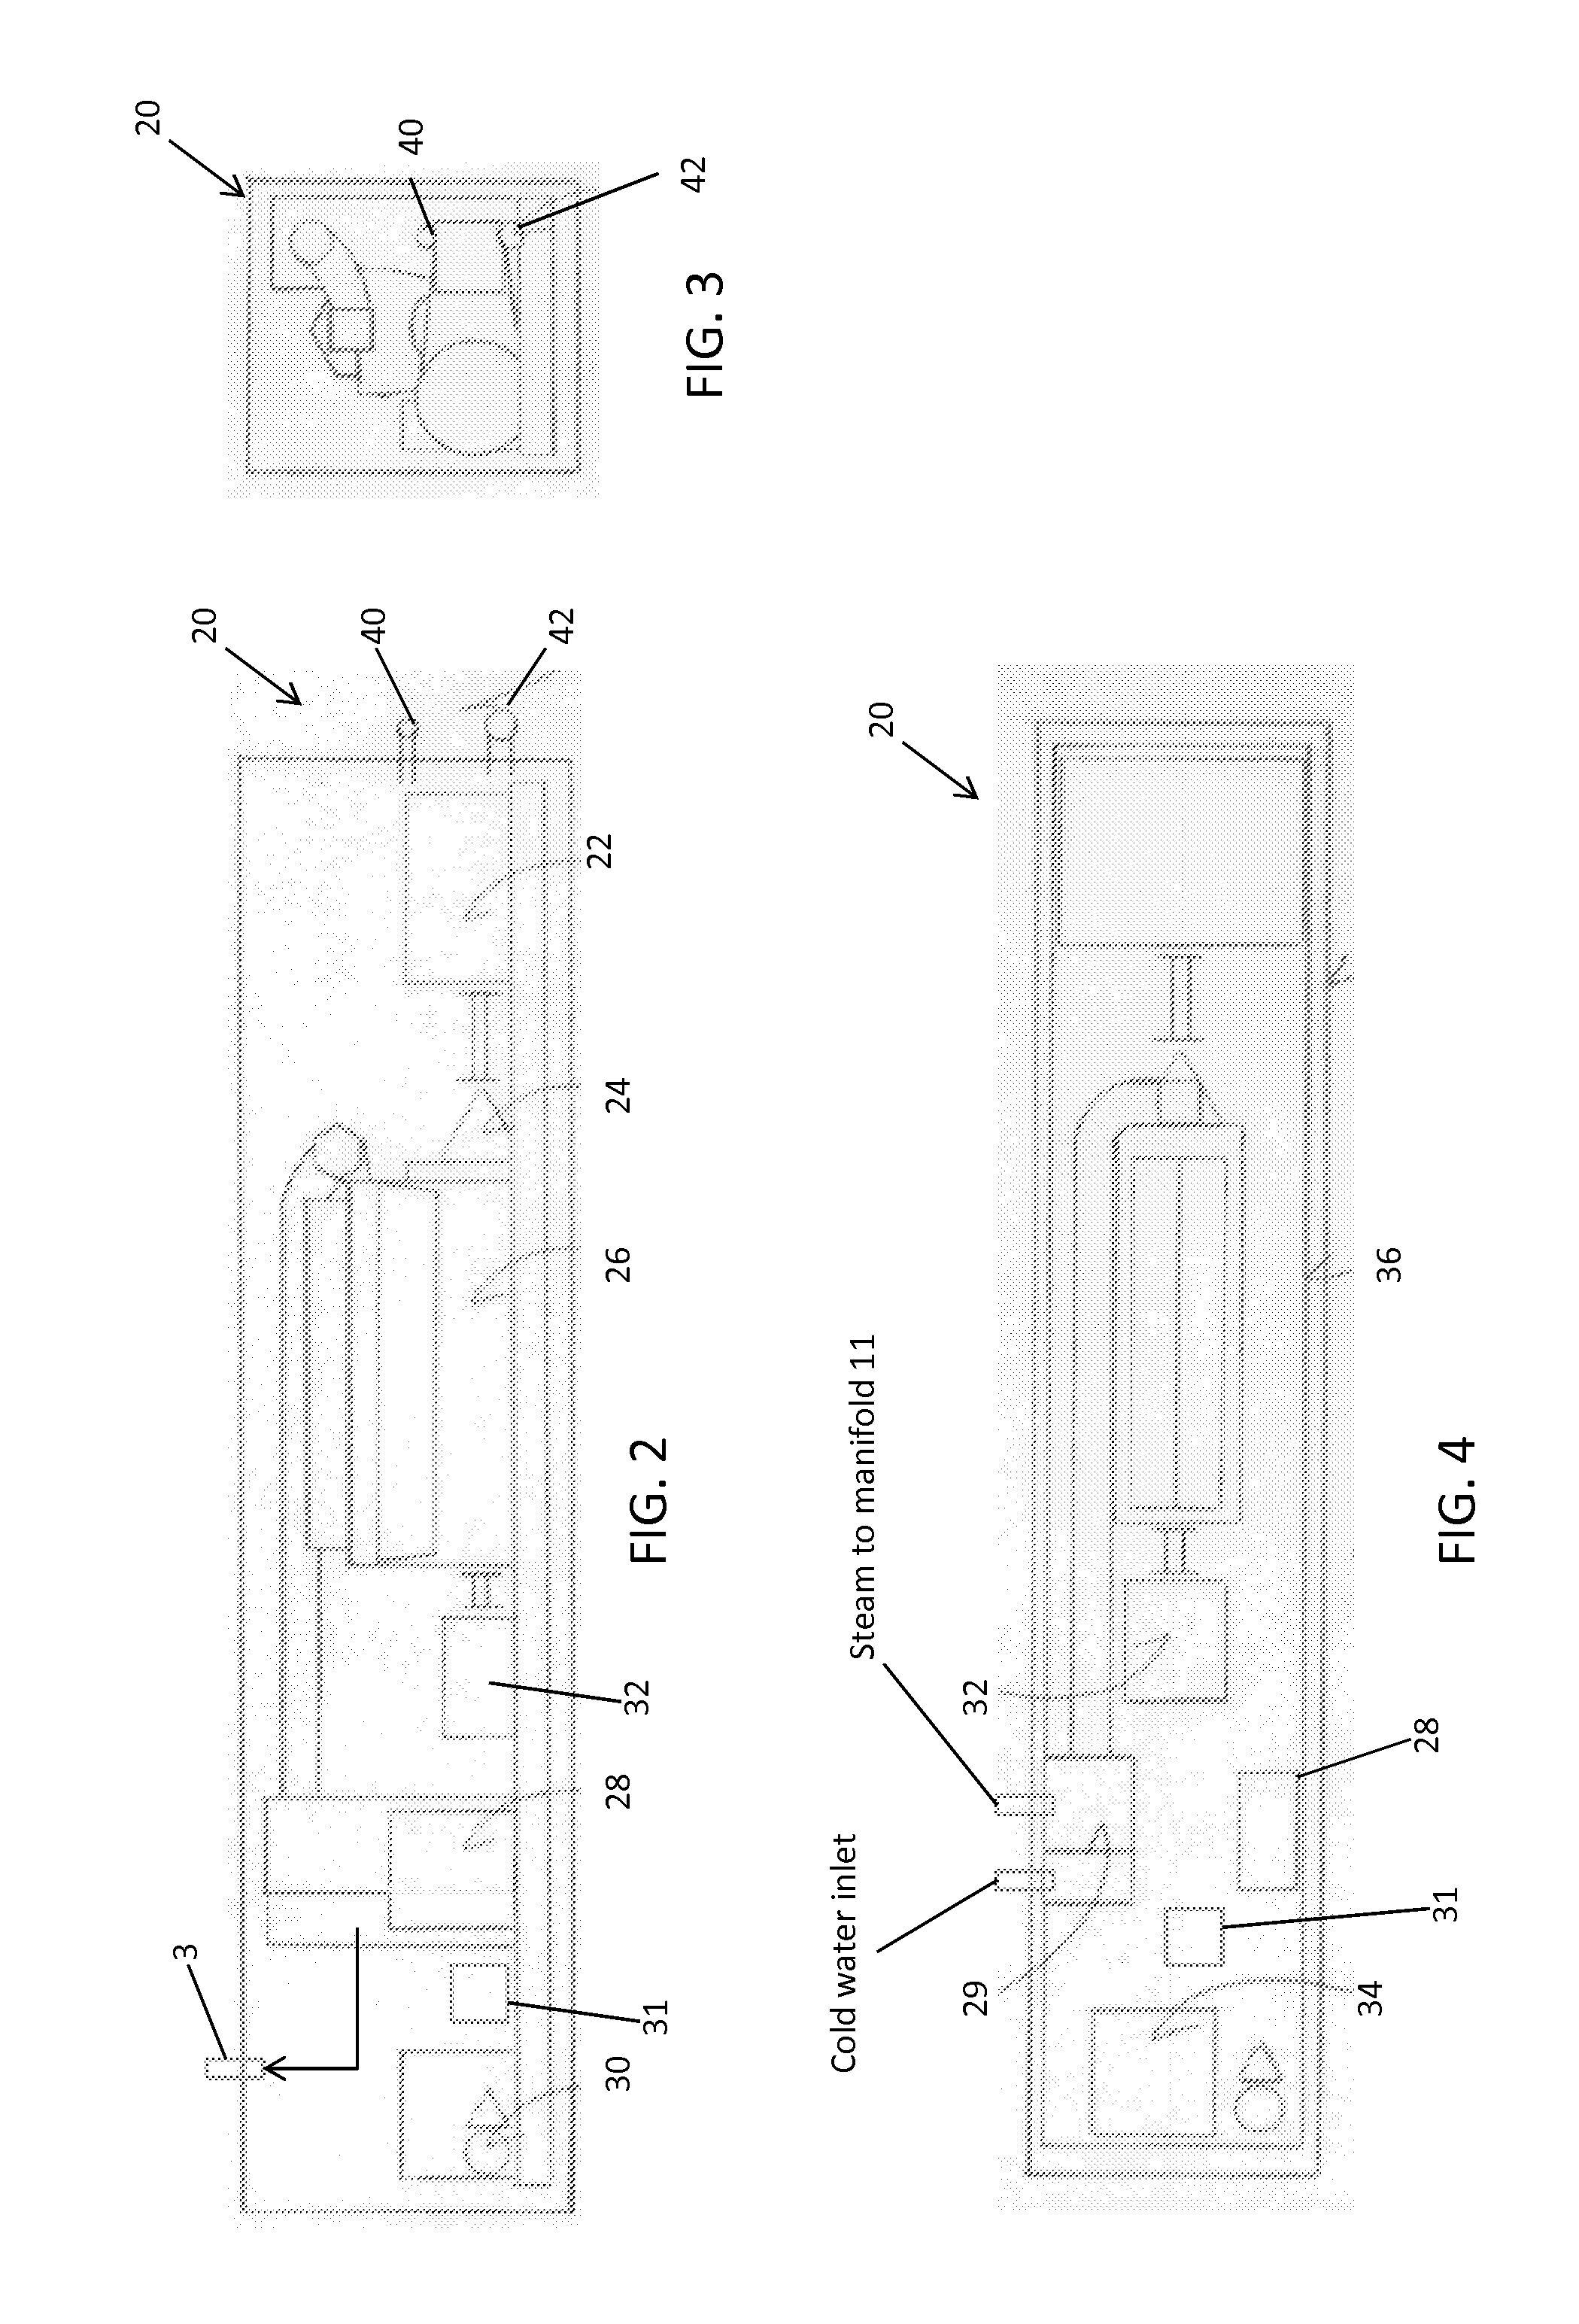 Hydraulic fracturing system and method